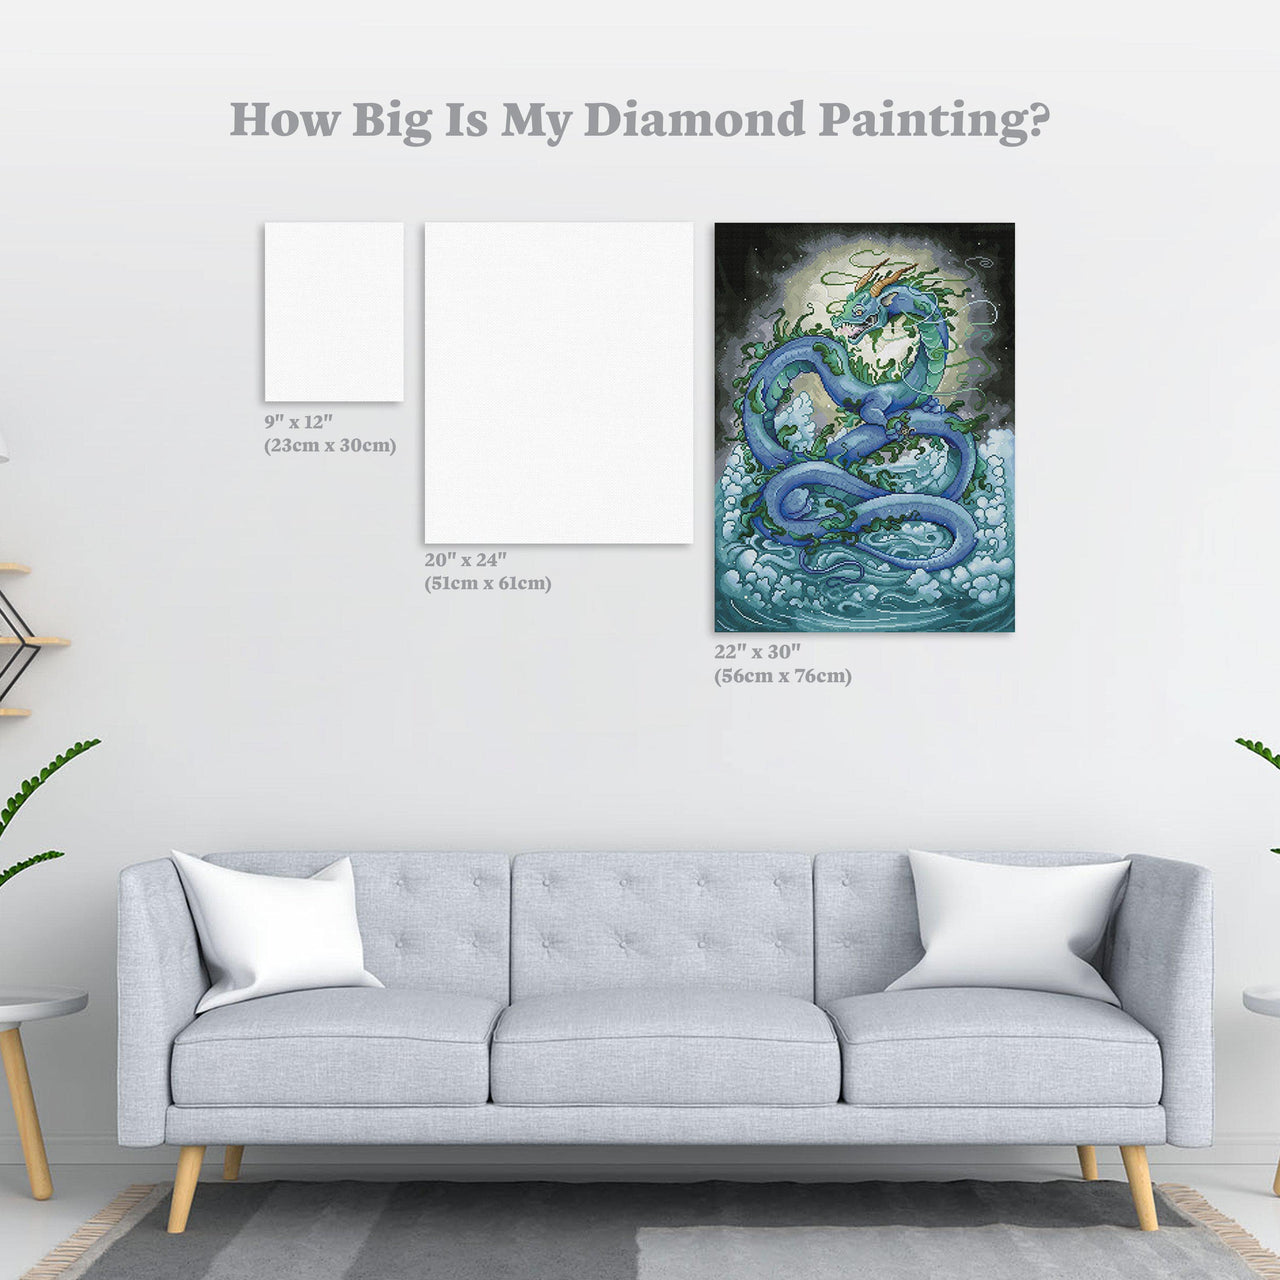 Diamond Painting The Leviathan 22" x 30″ (56cm x 76cm) / Square with 43 Colors including 4 ABs / 66,740